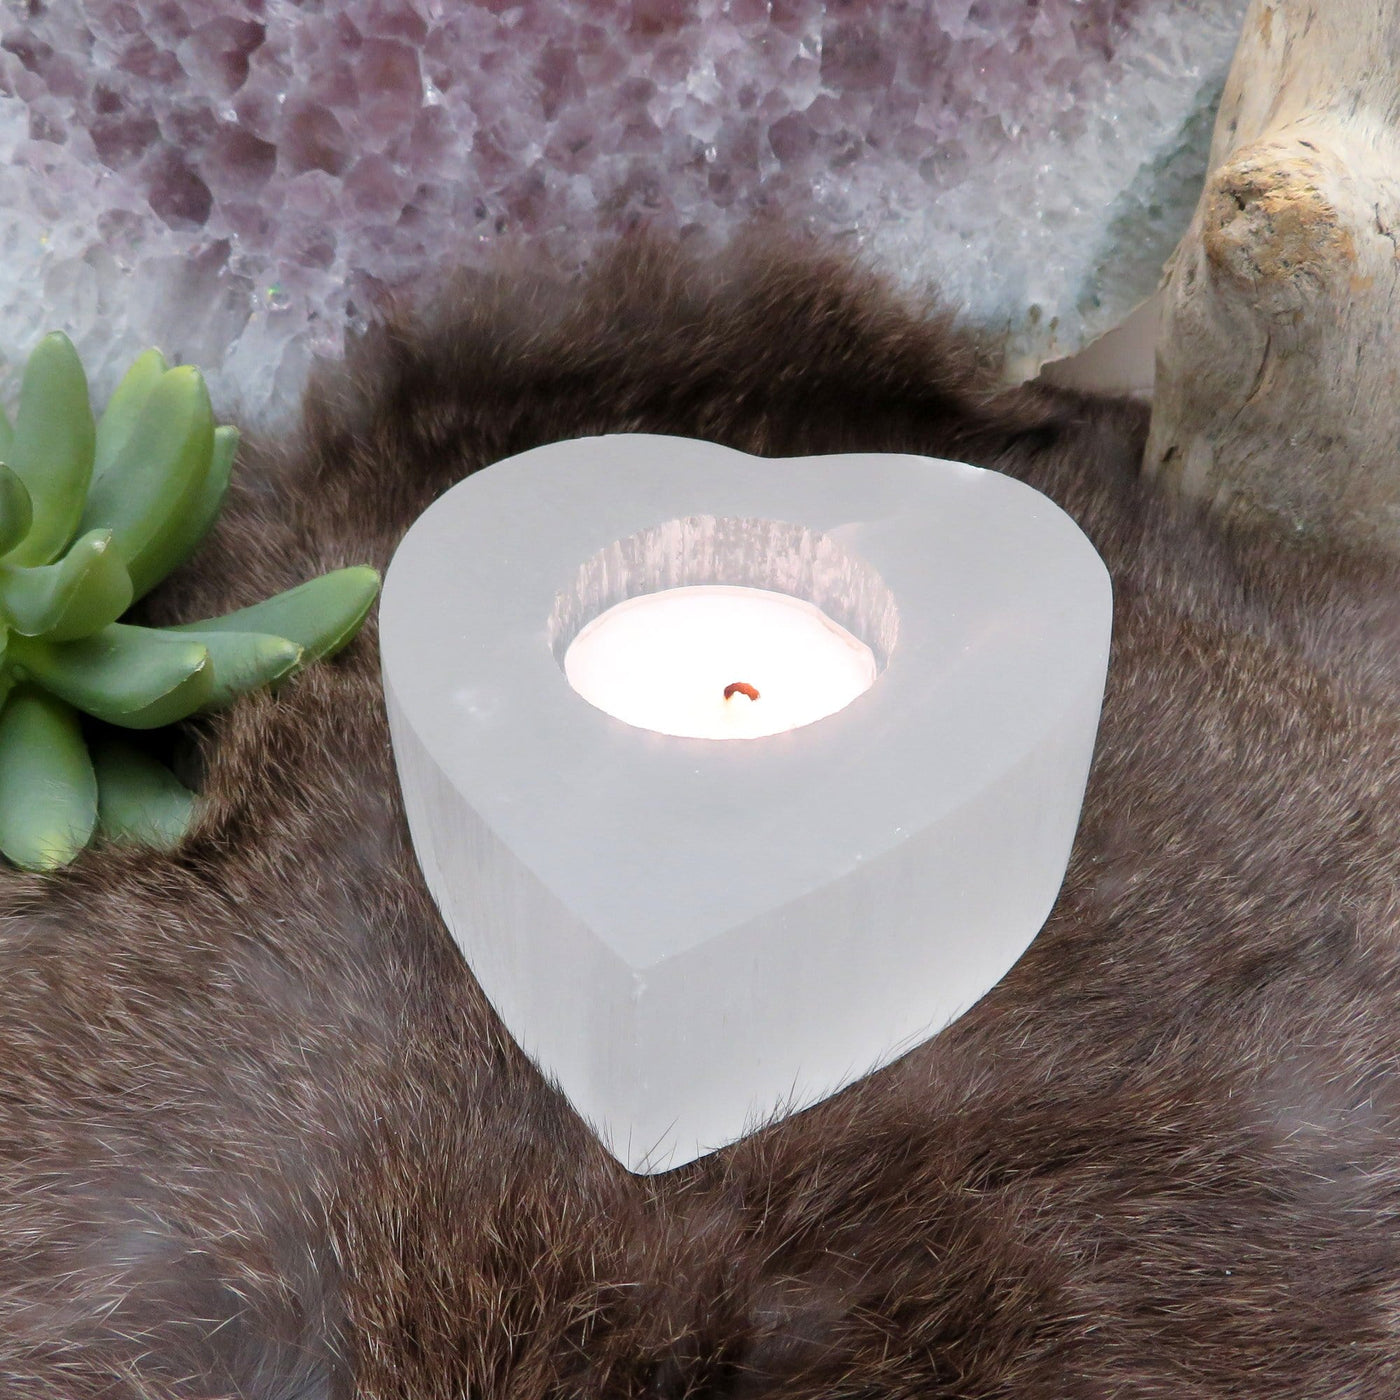 selenite heart shaped candle holder on display with candle (not included with purchase)